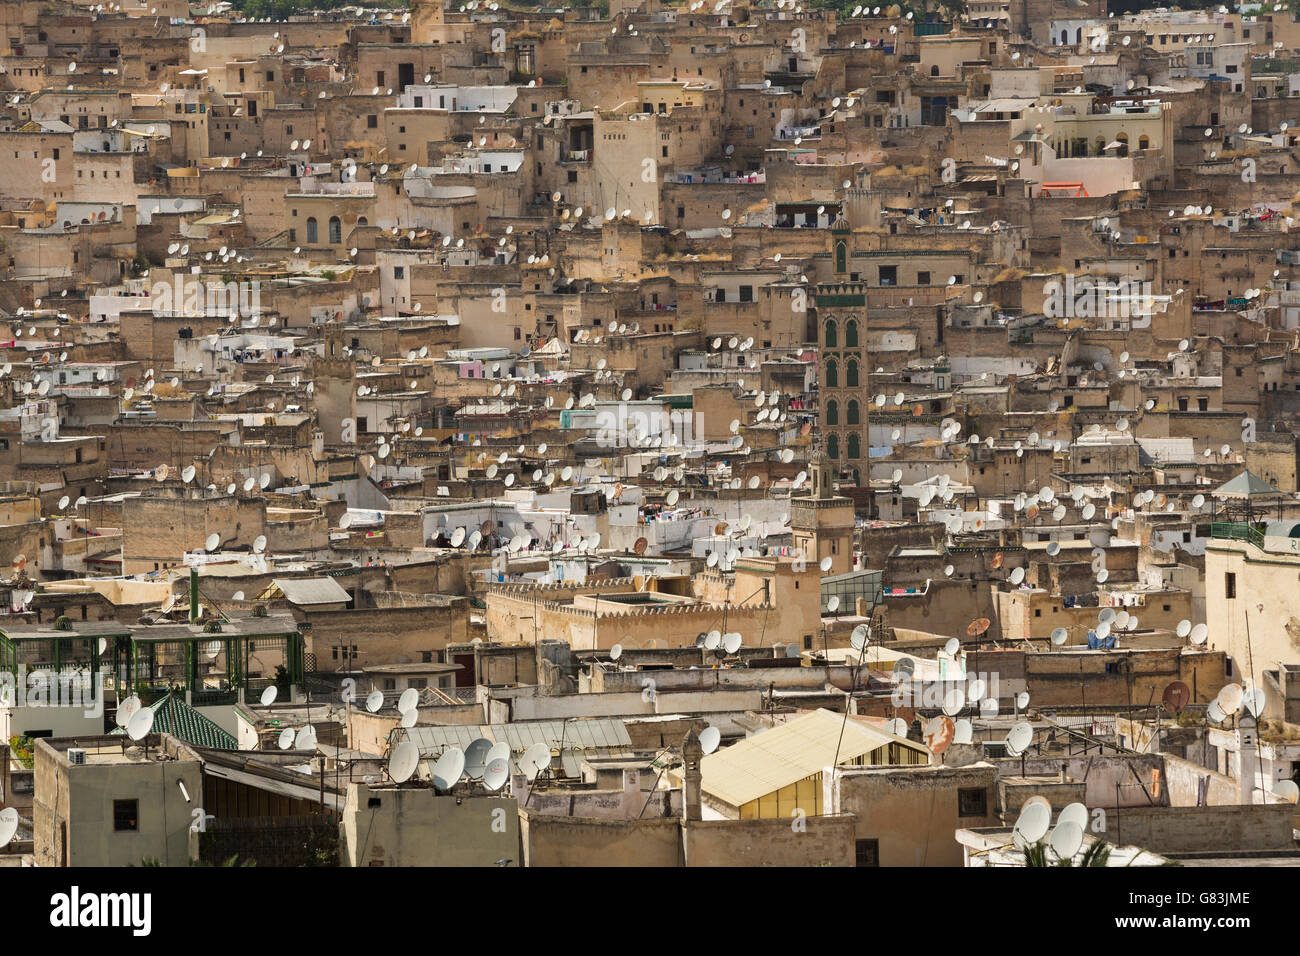 Satellite dishes dot rooftops in the old Medina of Fez, Morocco. Stock Photo